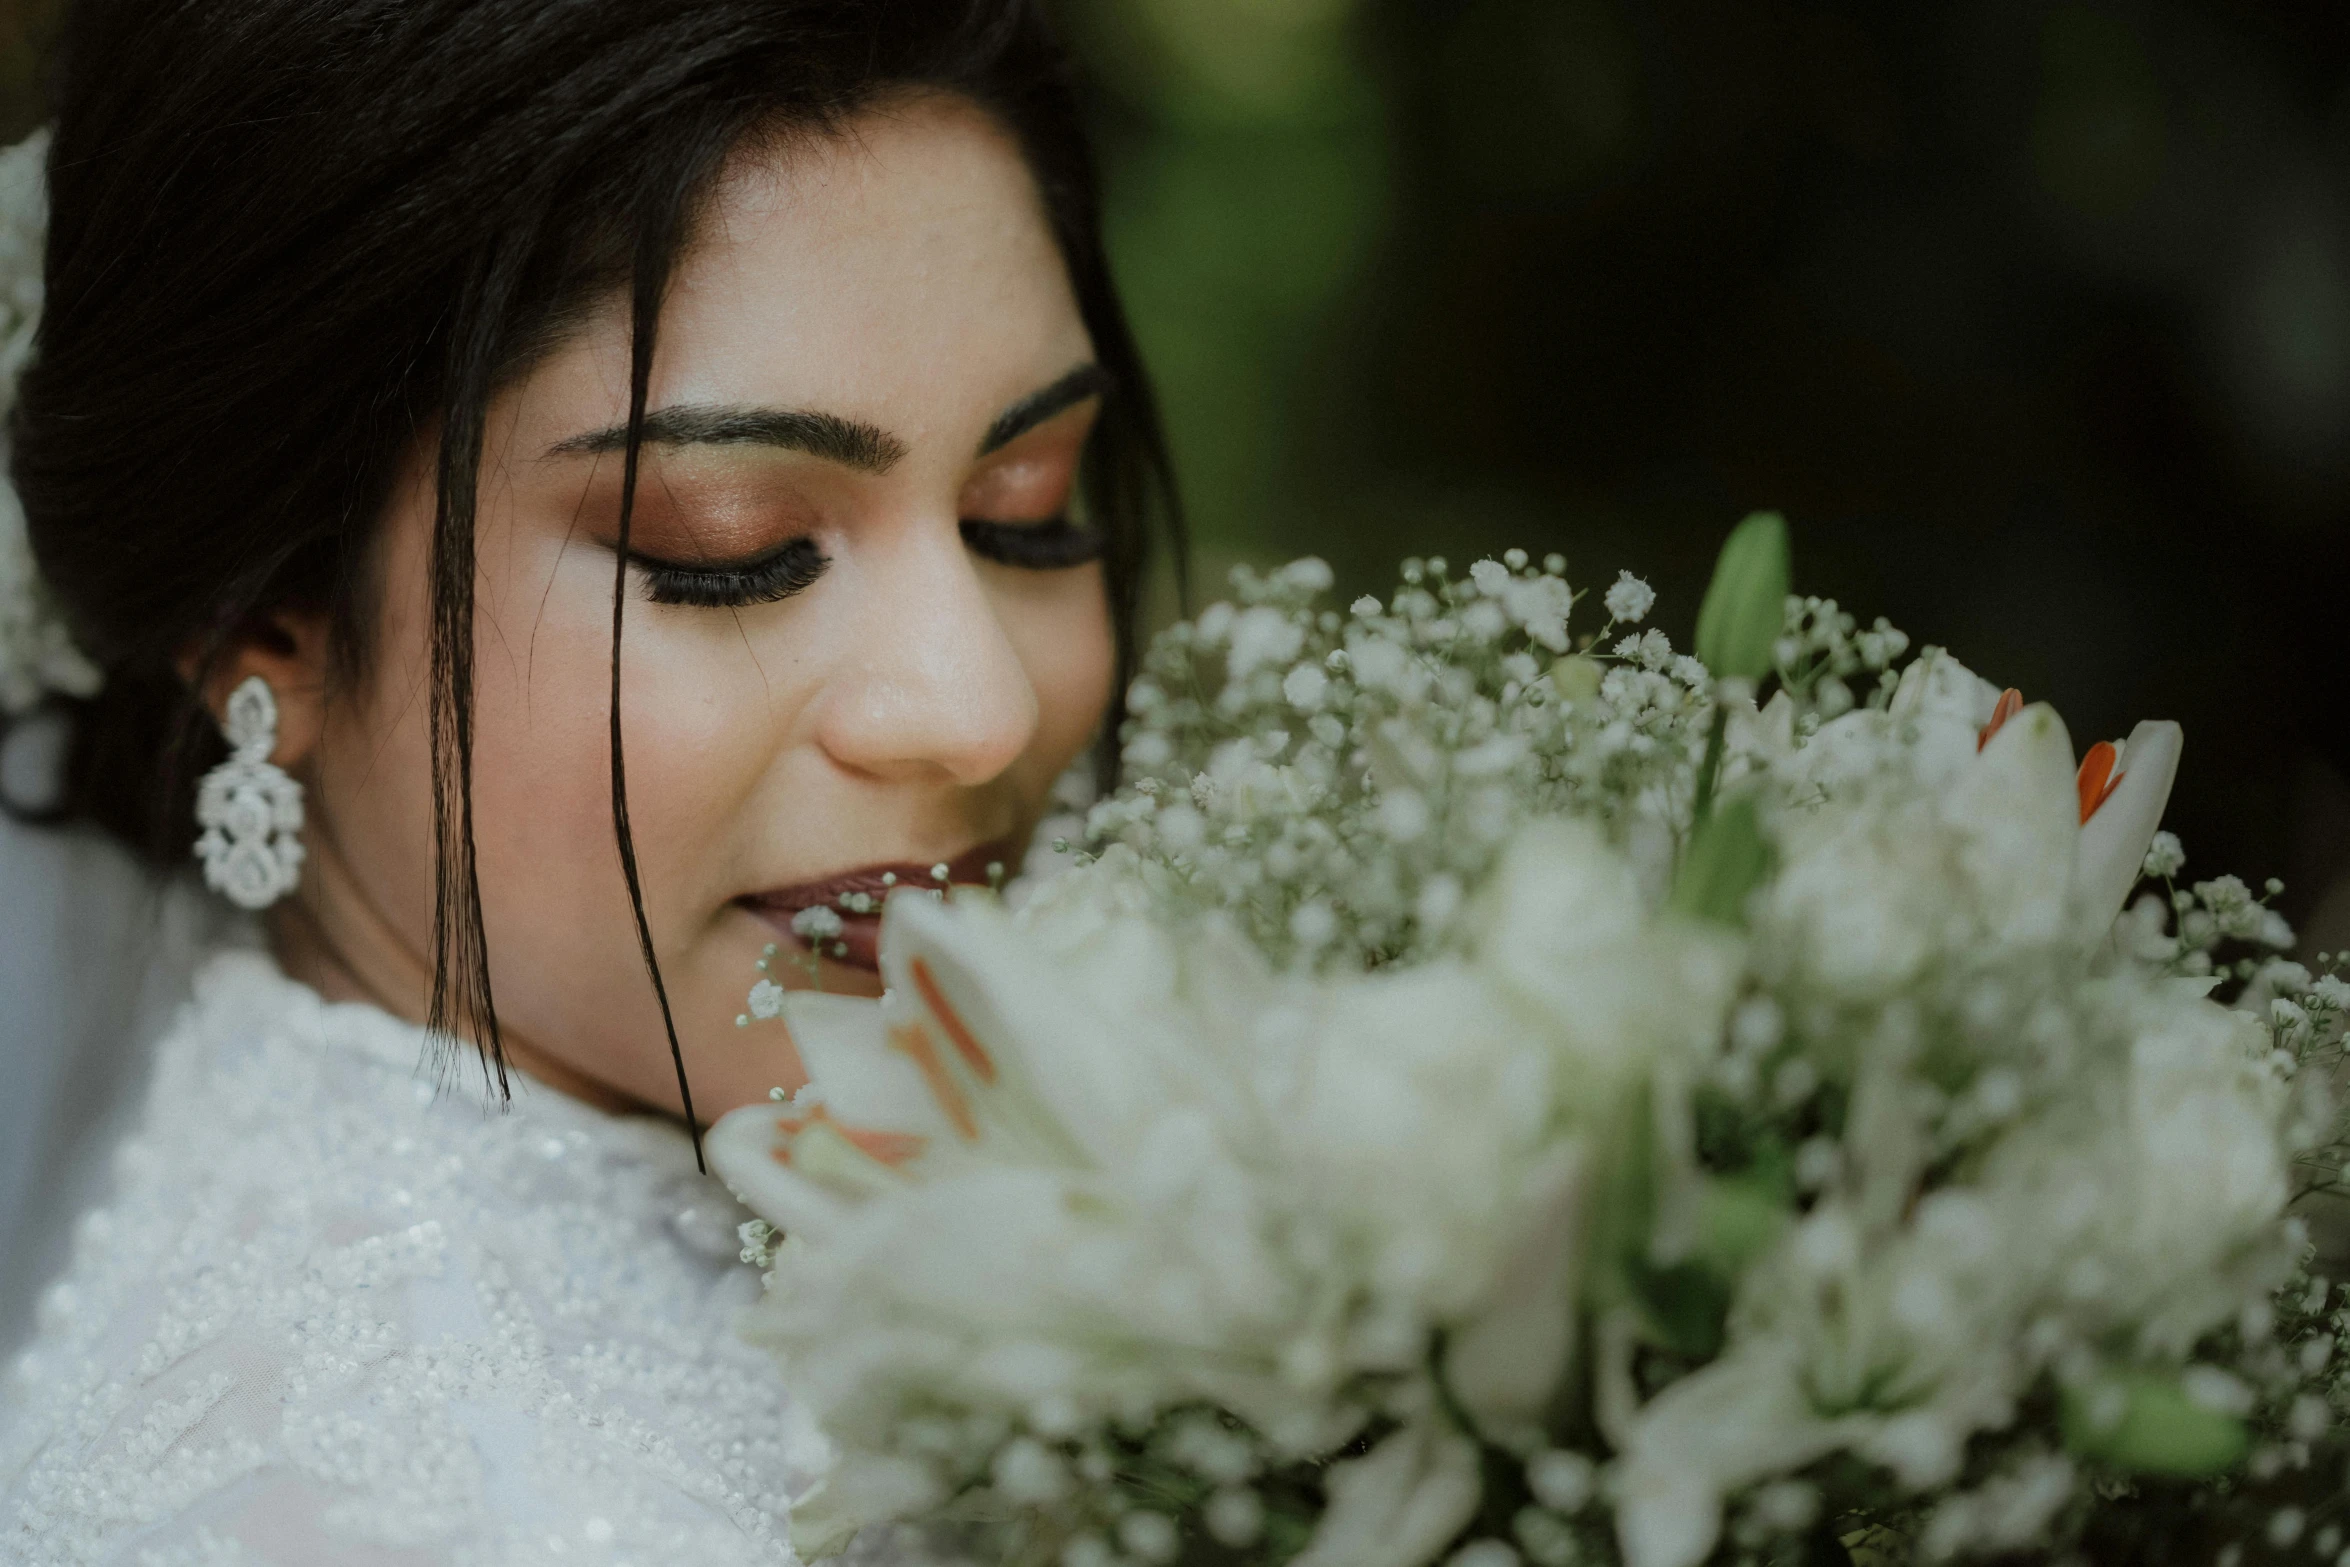 woman in wedding dress holding flowers near her face